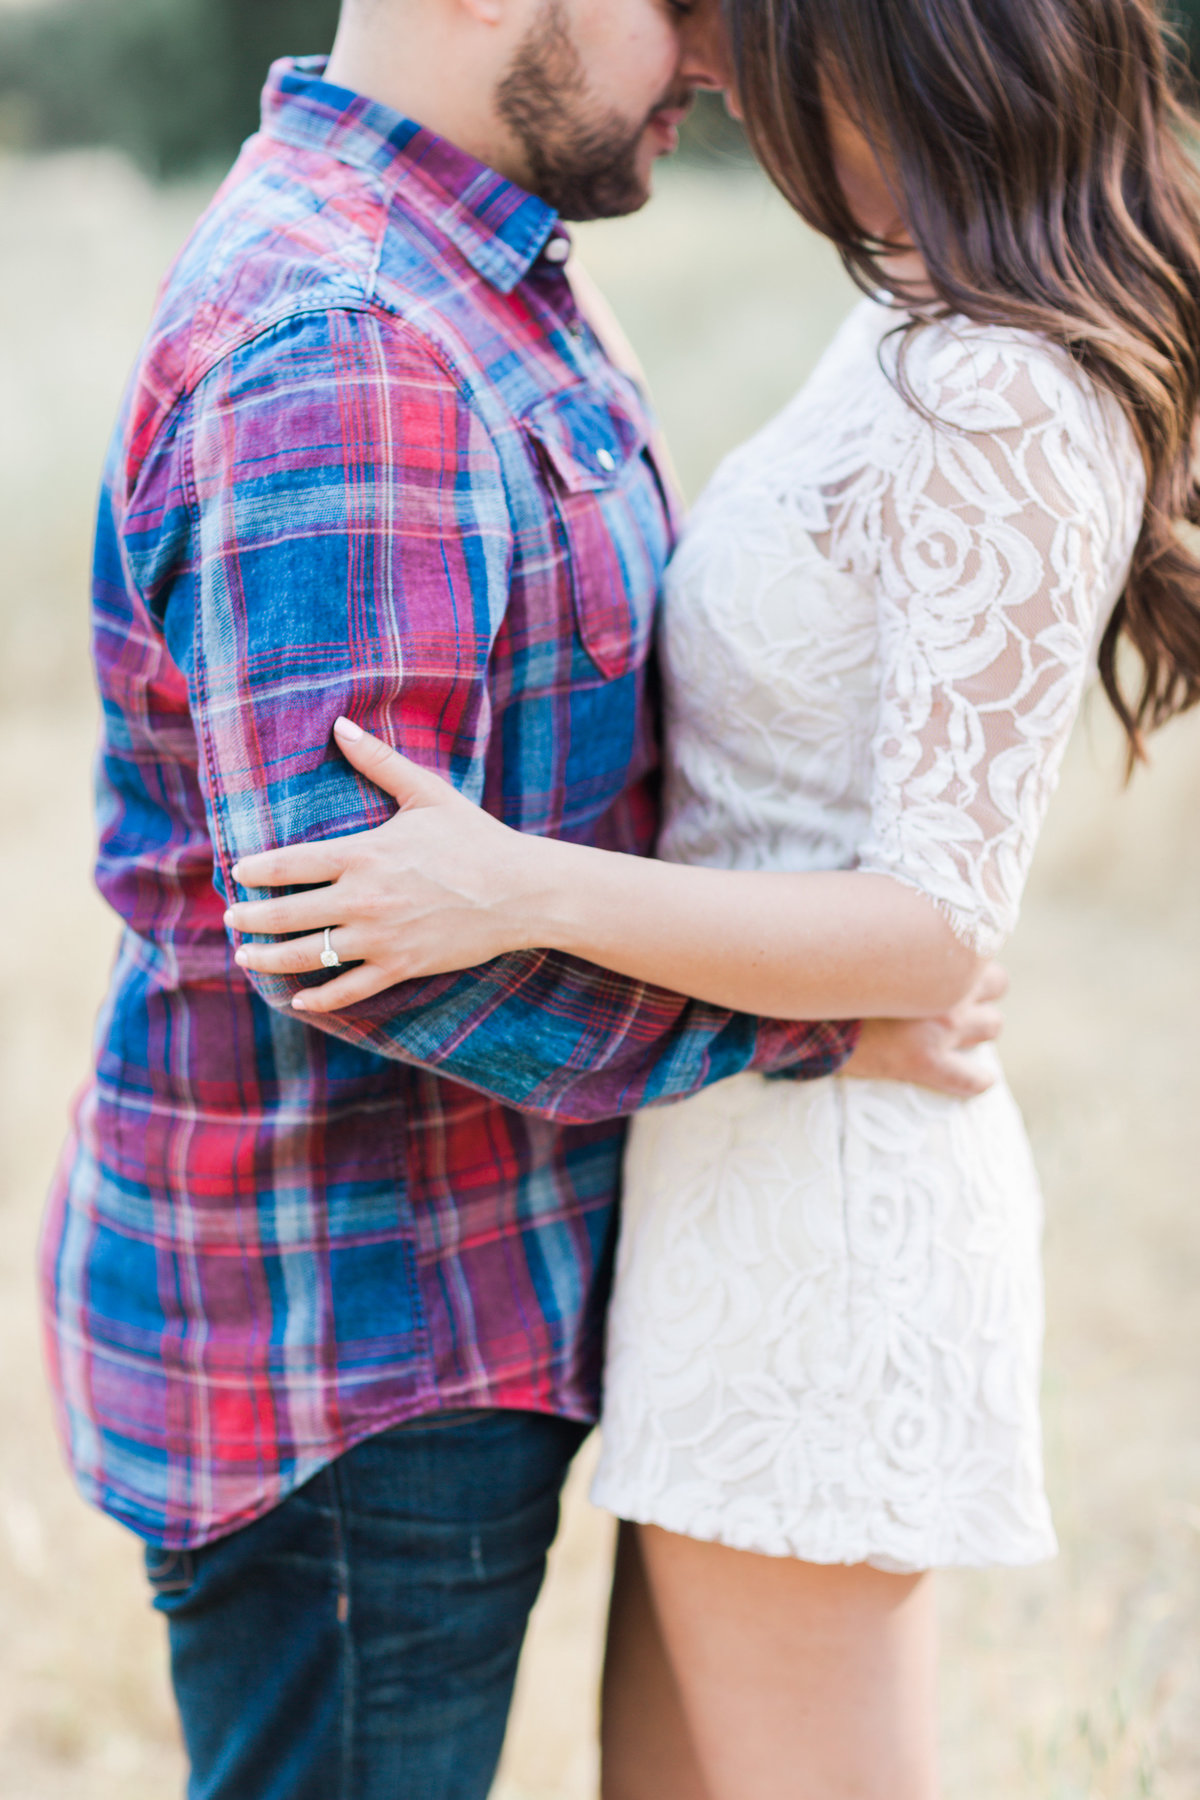 Malibu Creek State Park Engagement Session_Valorie Darling Photography-7080